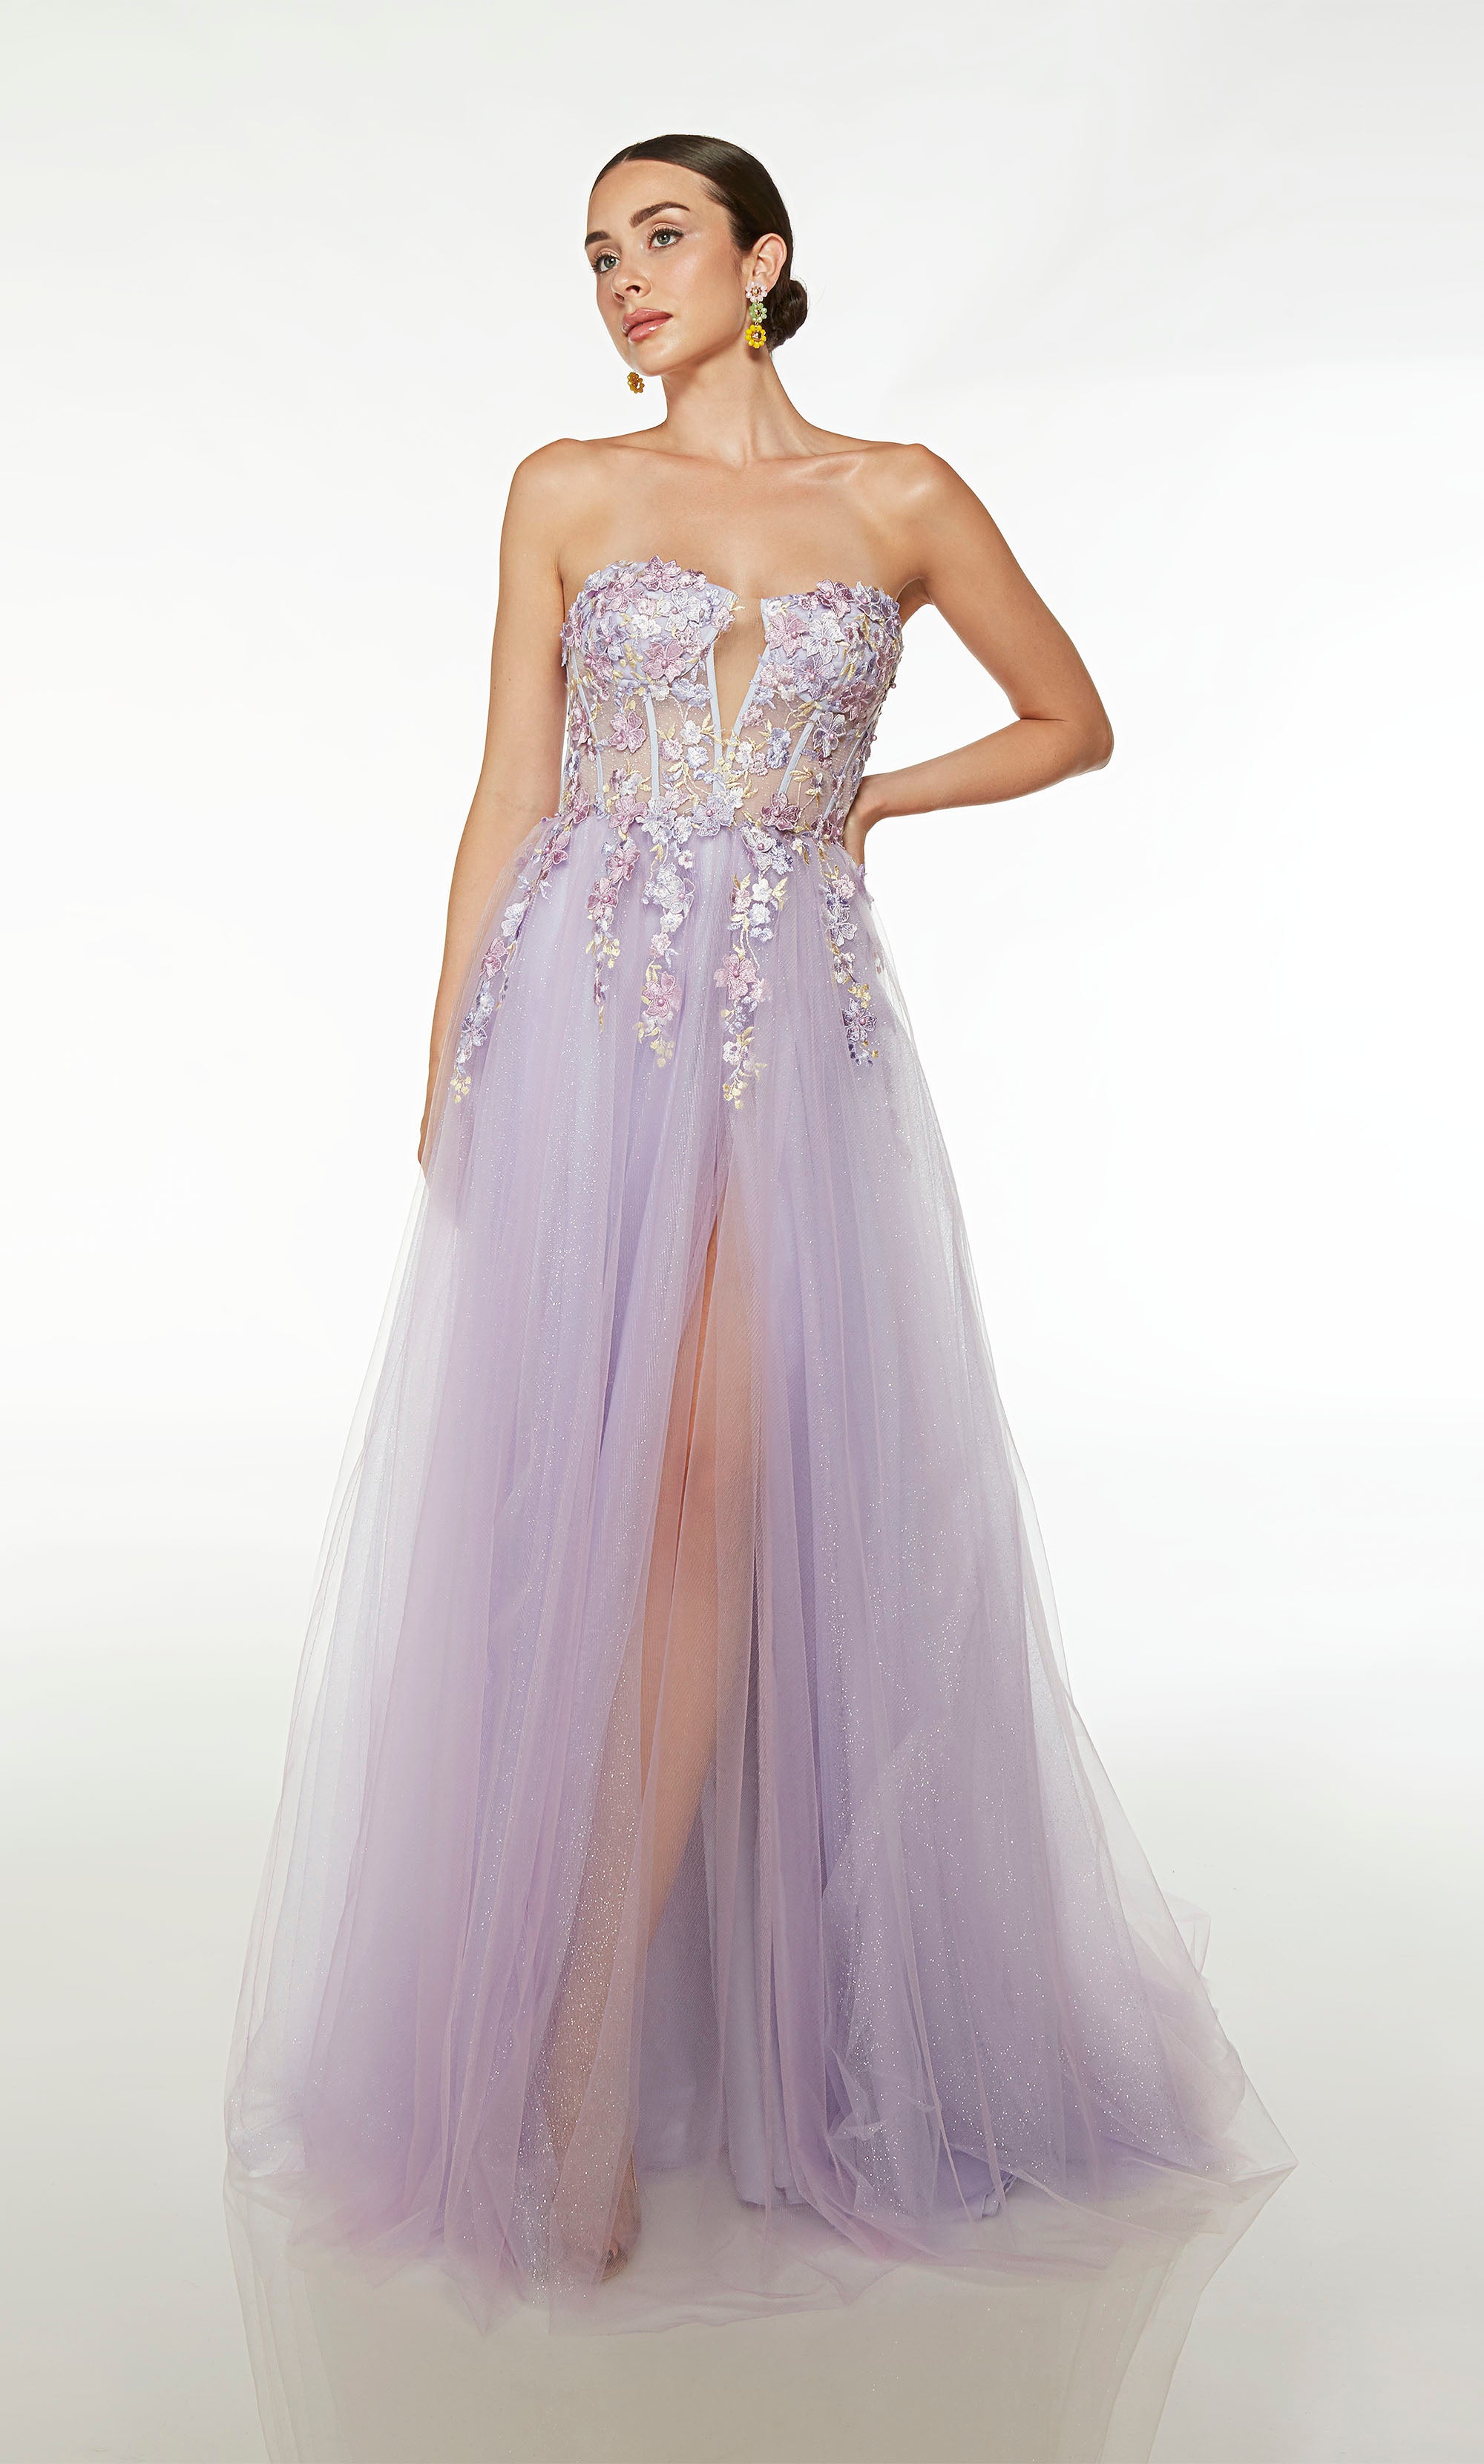 Dreamy lilac purple corset dress with sheer bodice, floral lace appliques, glitter tulle skirt, side slit, lace-up back, and trailing train for an magical touch.